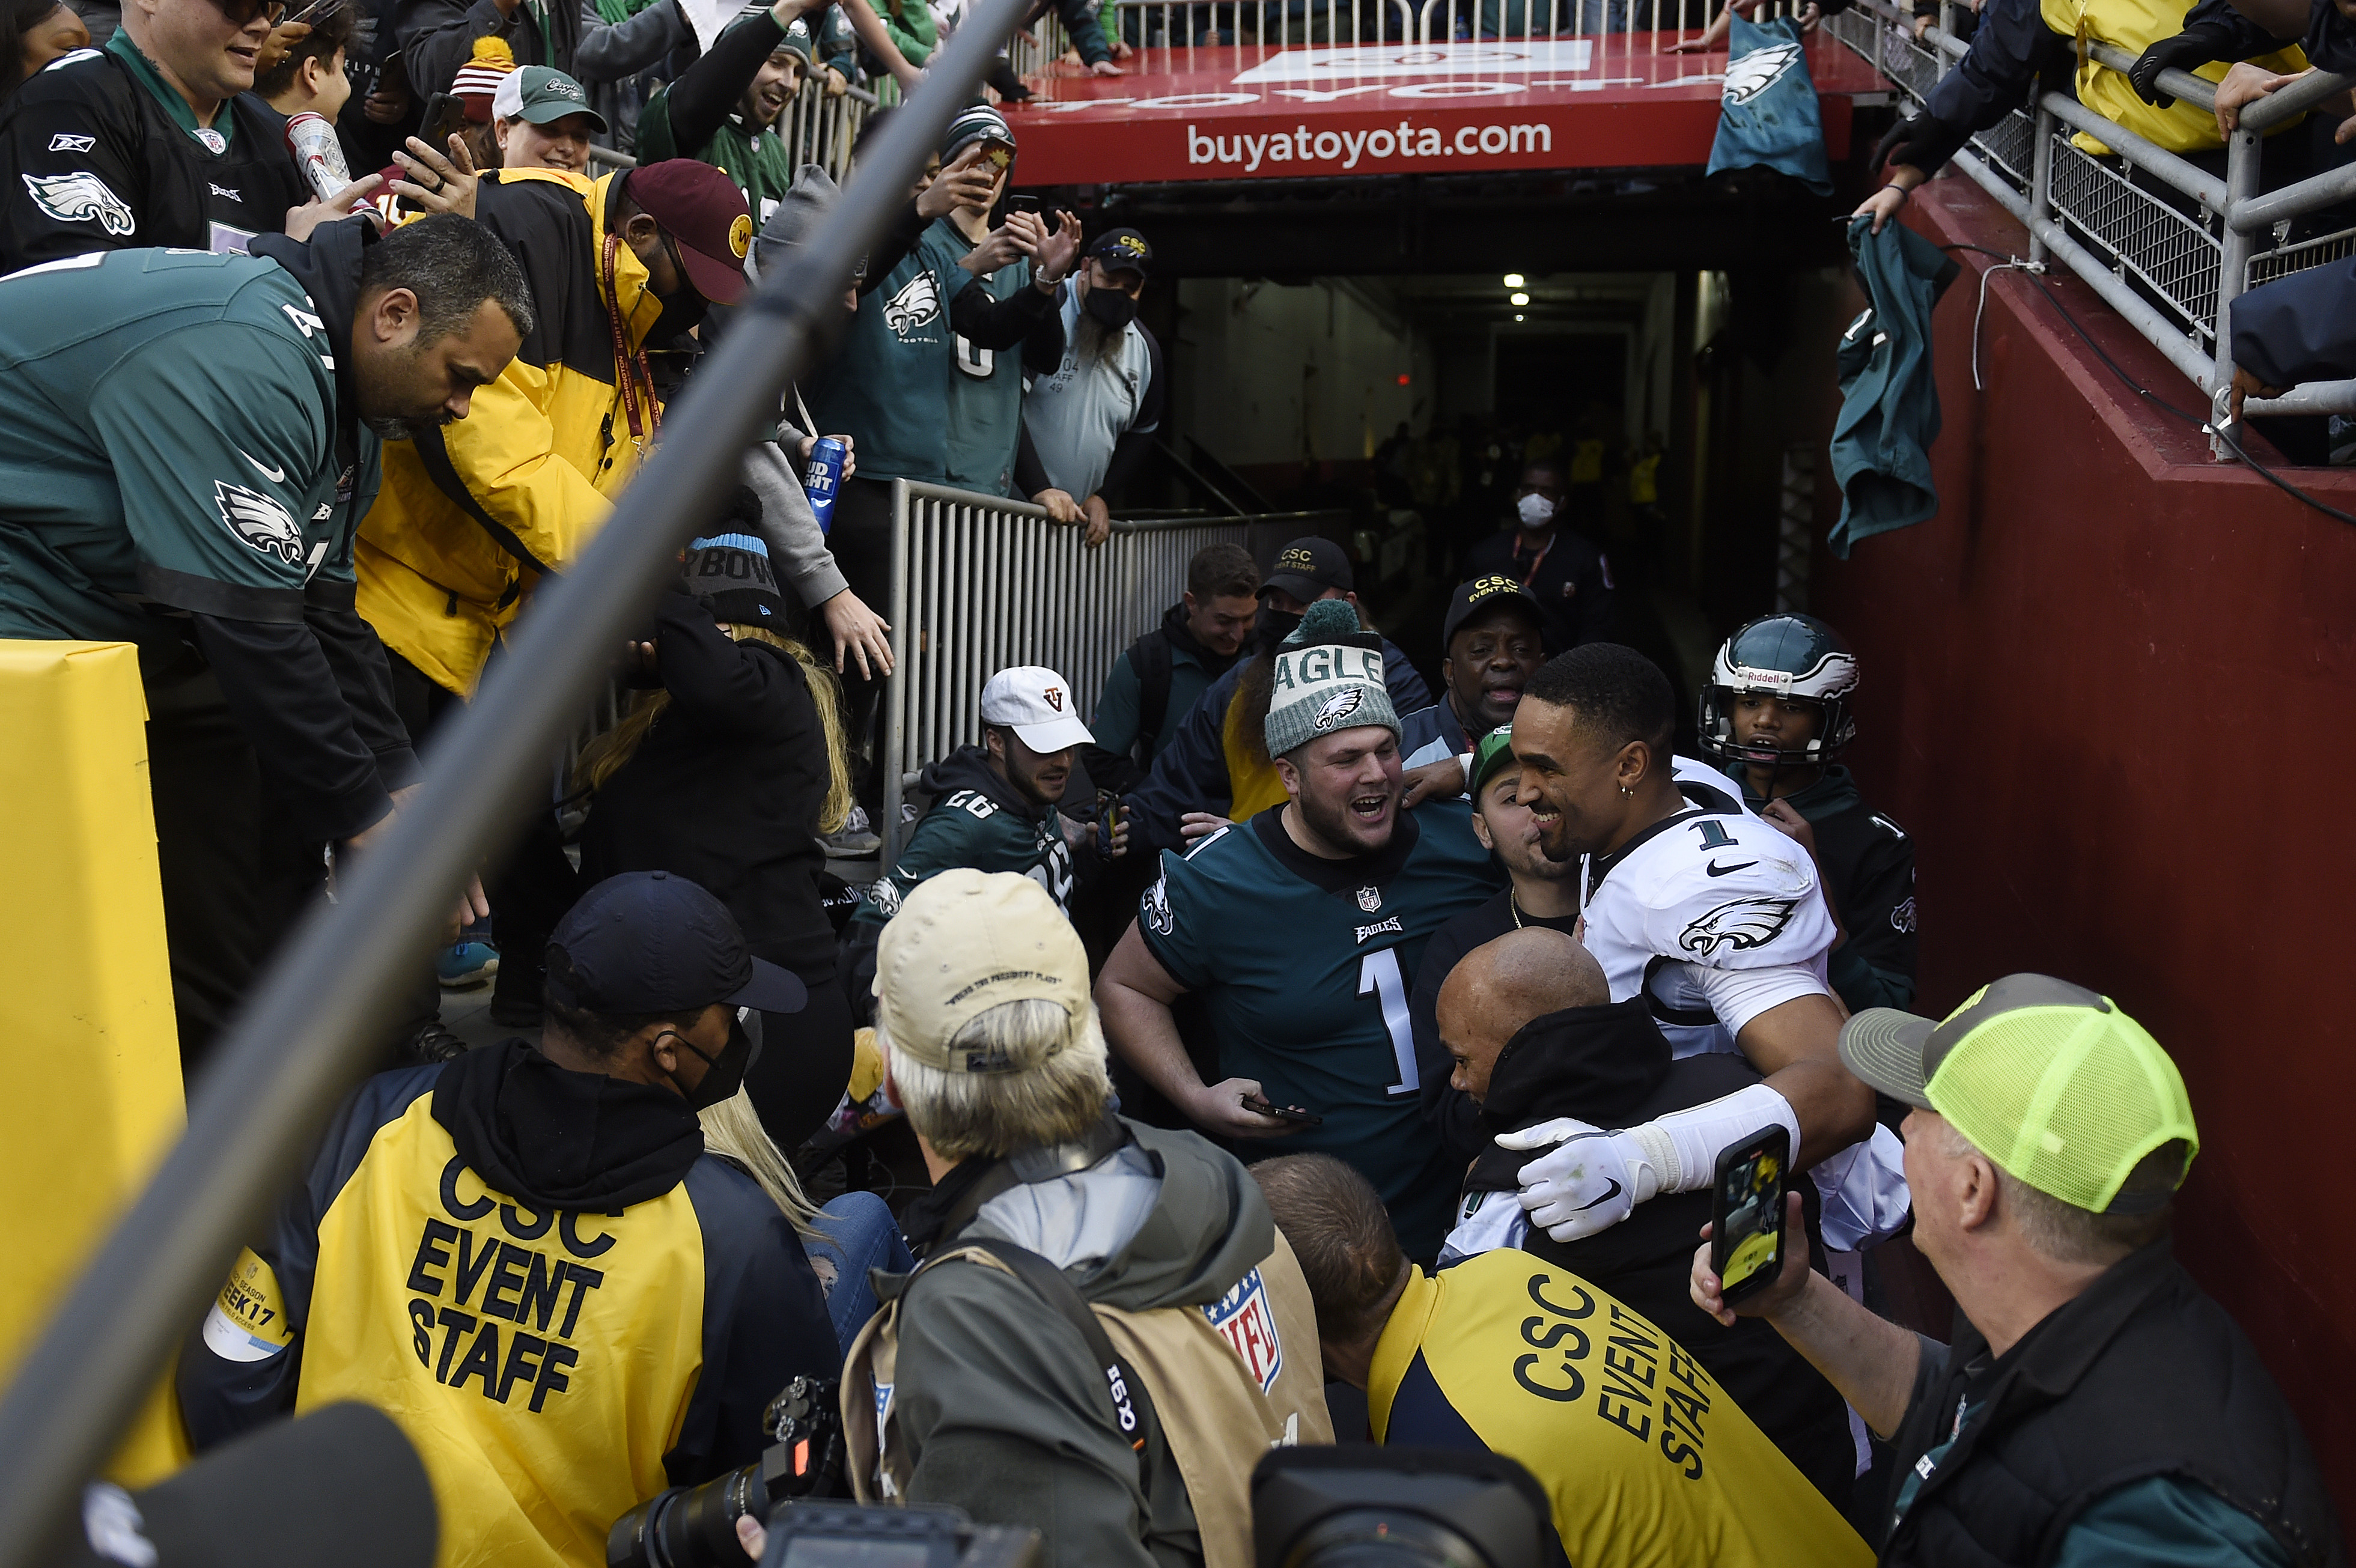 Jalen Hurts poses with Eagles fans after a railing collapsed at FedEx Field